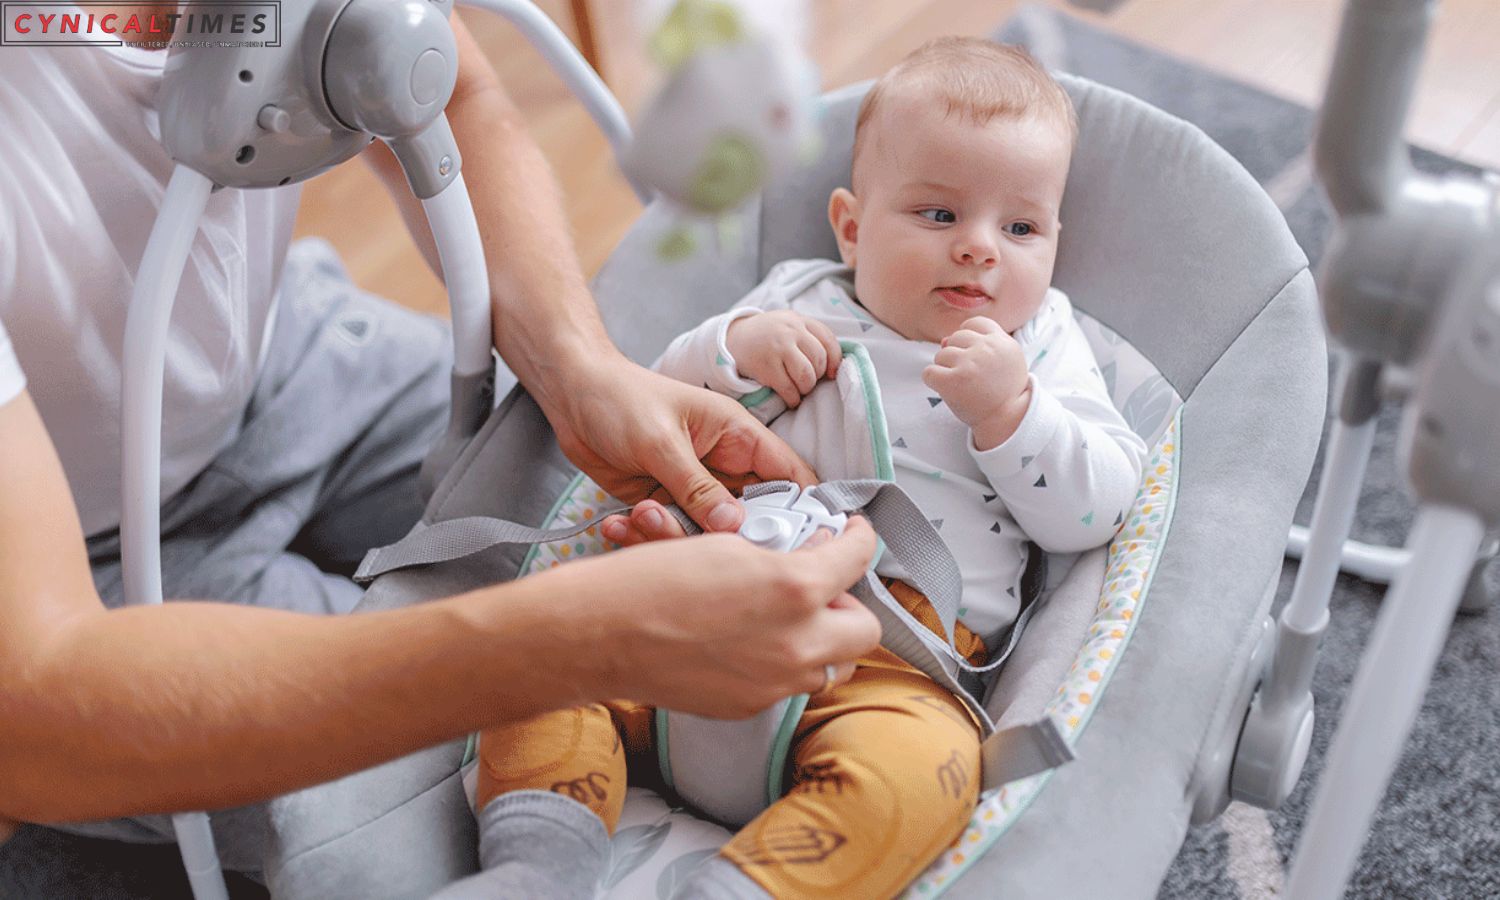 PSC Proposes Redesign to Prevent Infant